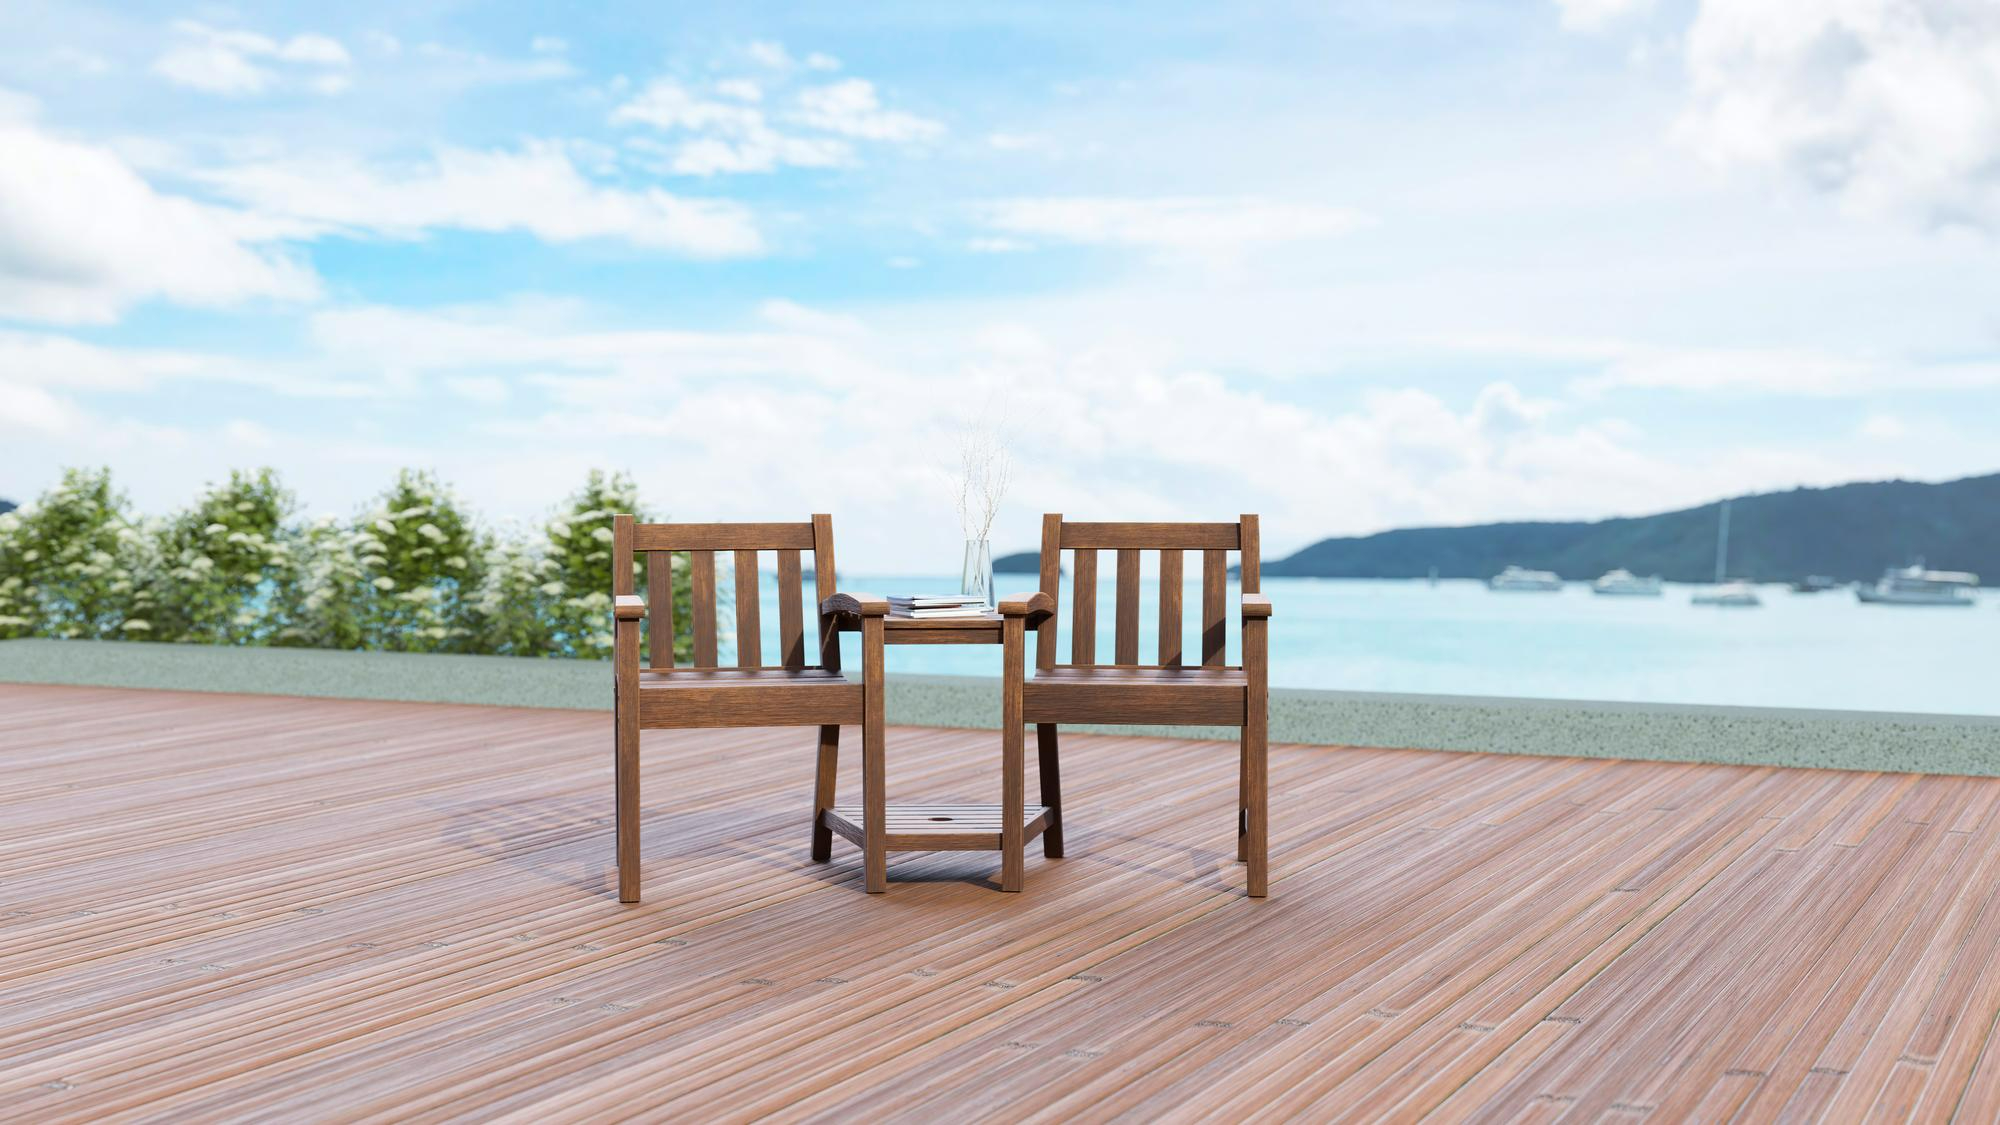 What is best way to restain your decking?